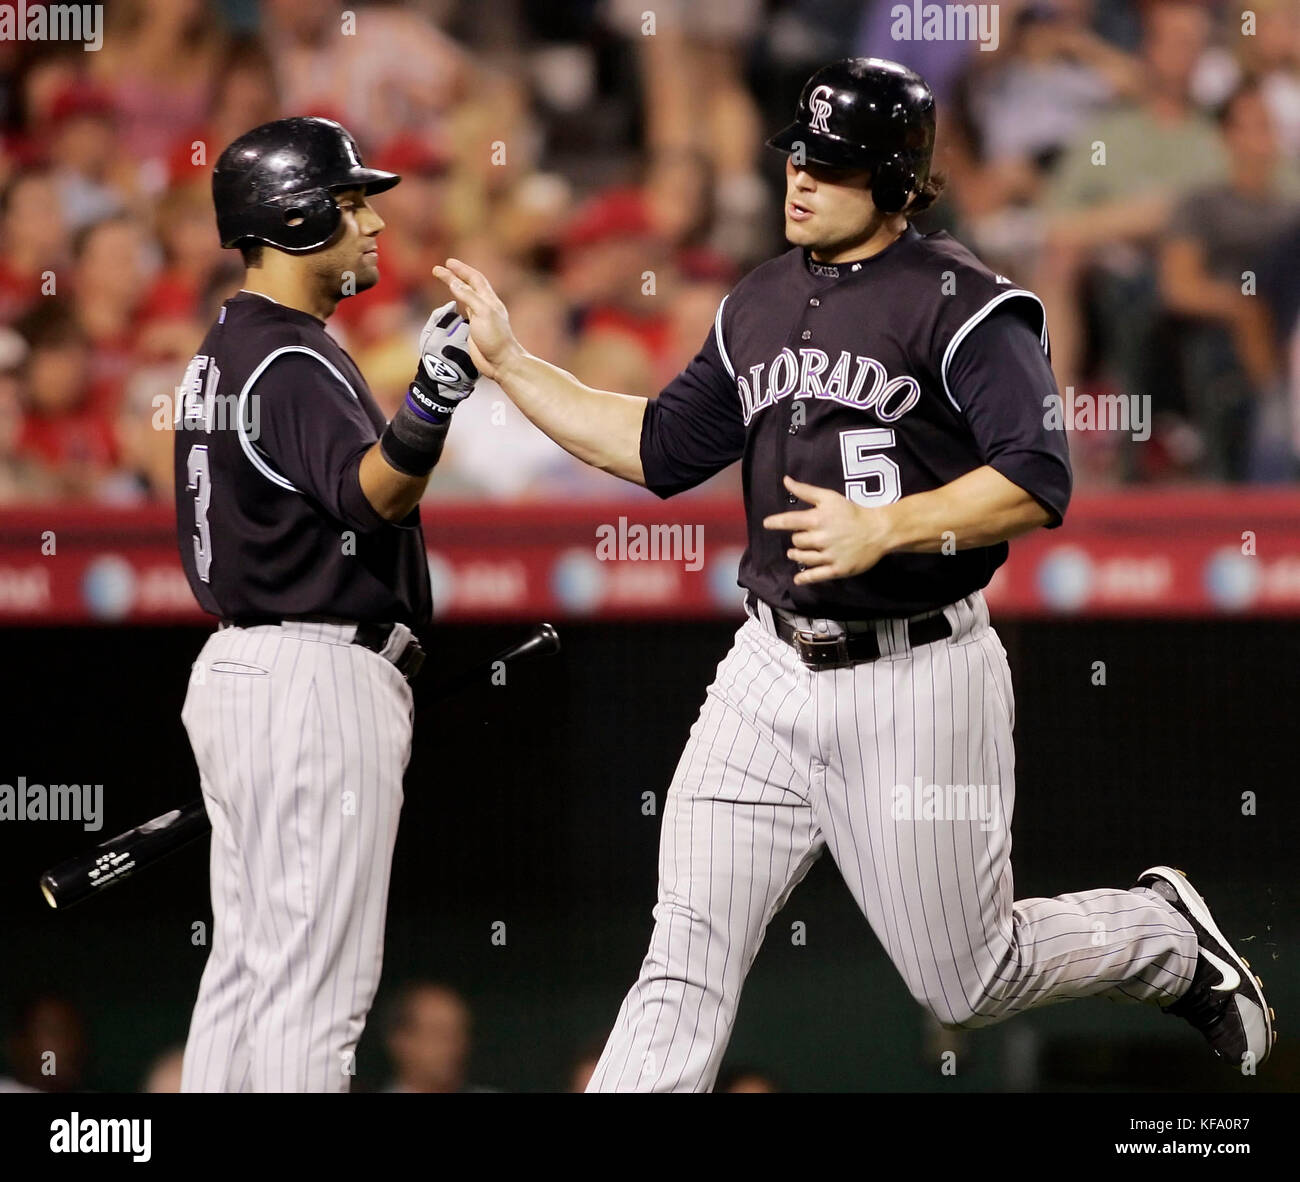 Colorado Rockies' Matt Holliday, right, gets a high-five from teammate  Jorge Piedra after scoring a run on a hit by Brad Hawpe off Los Angeles  Angels pitcher John Lackey in the sixth